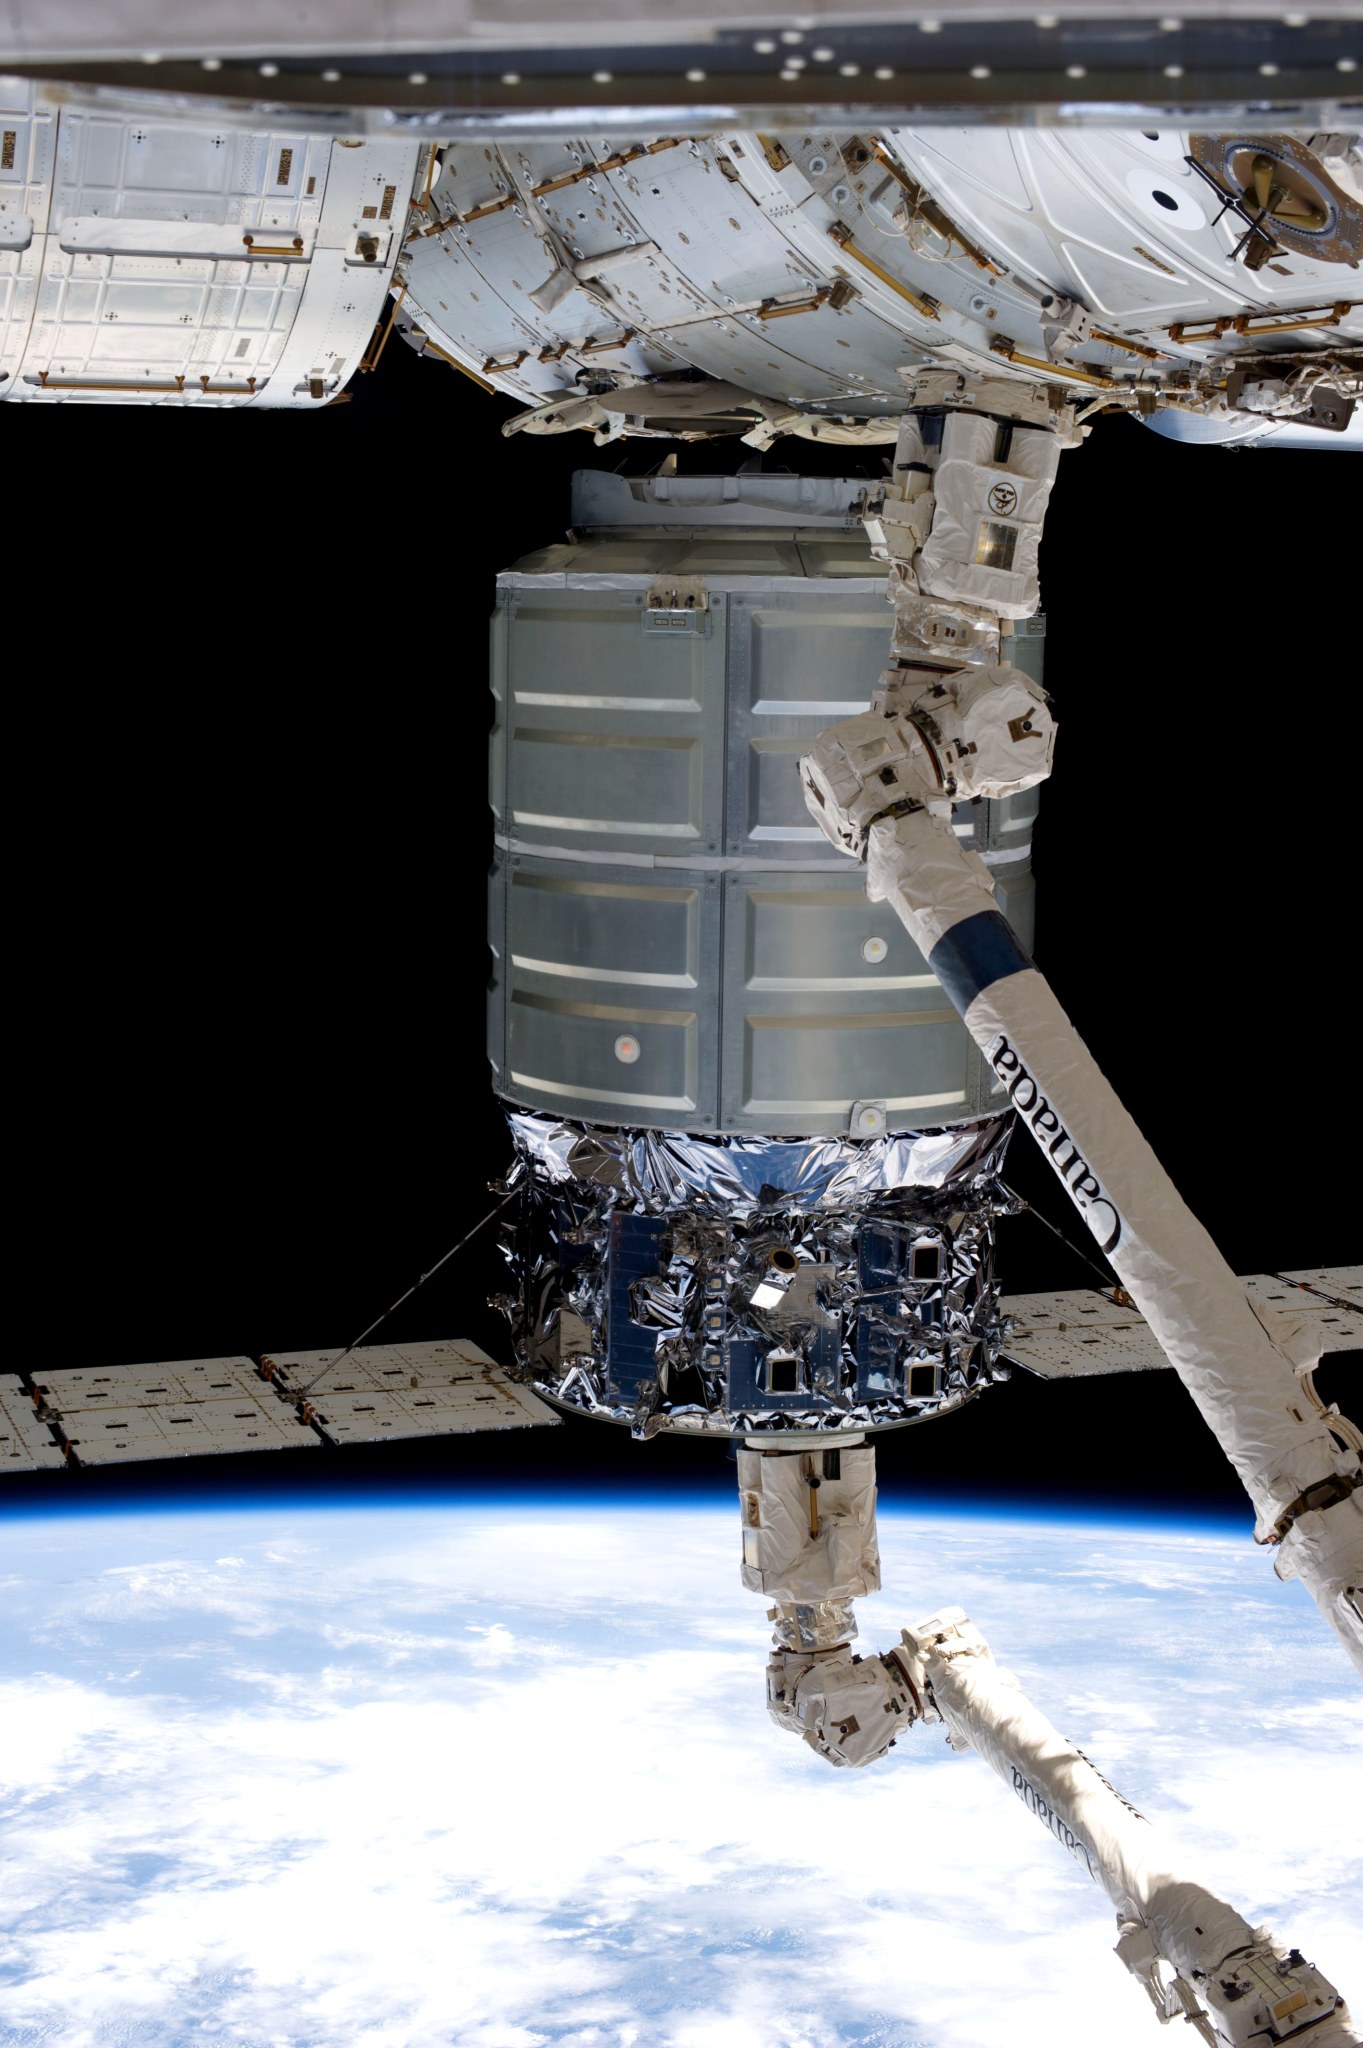 A Cygnus spacecraft docked to the International Space Station.